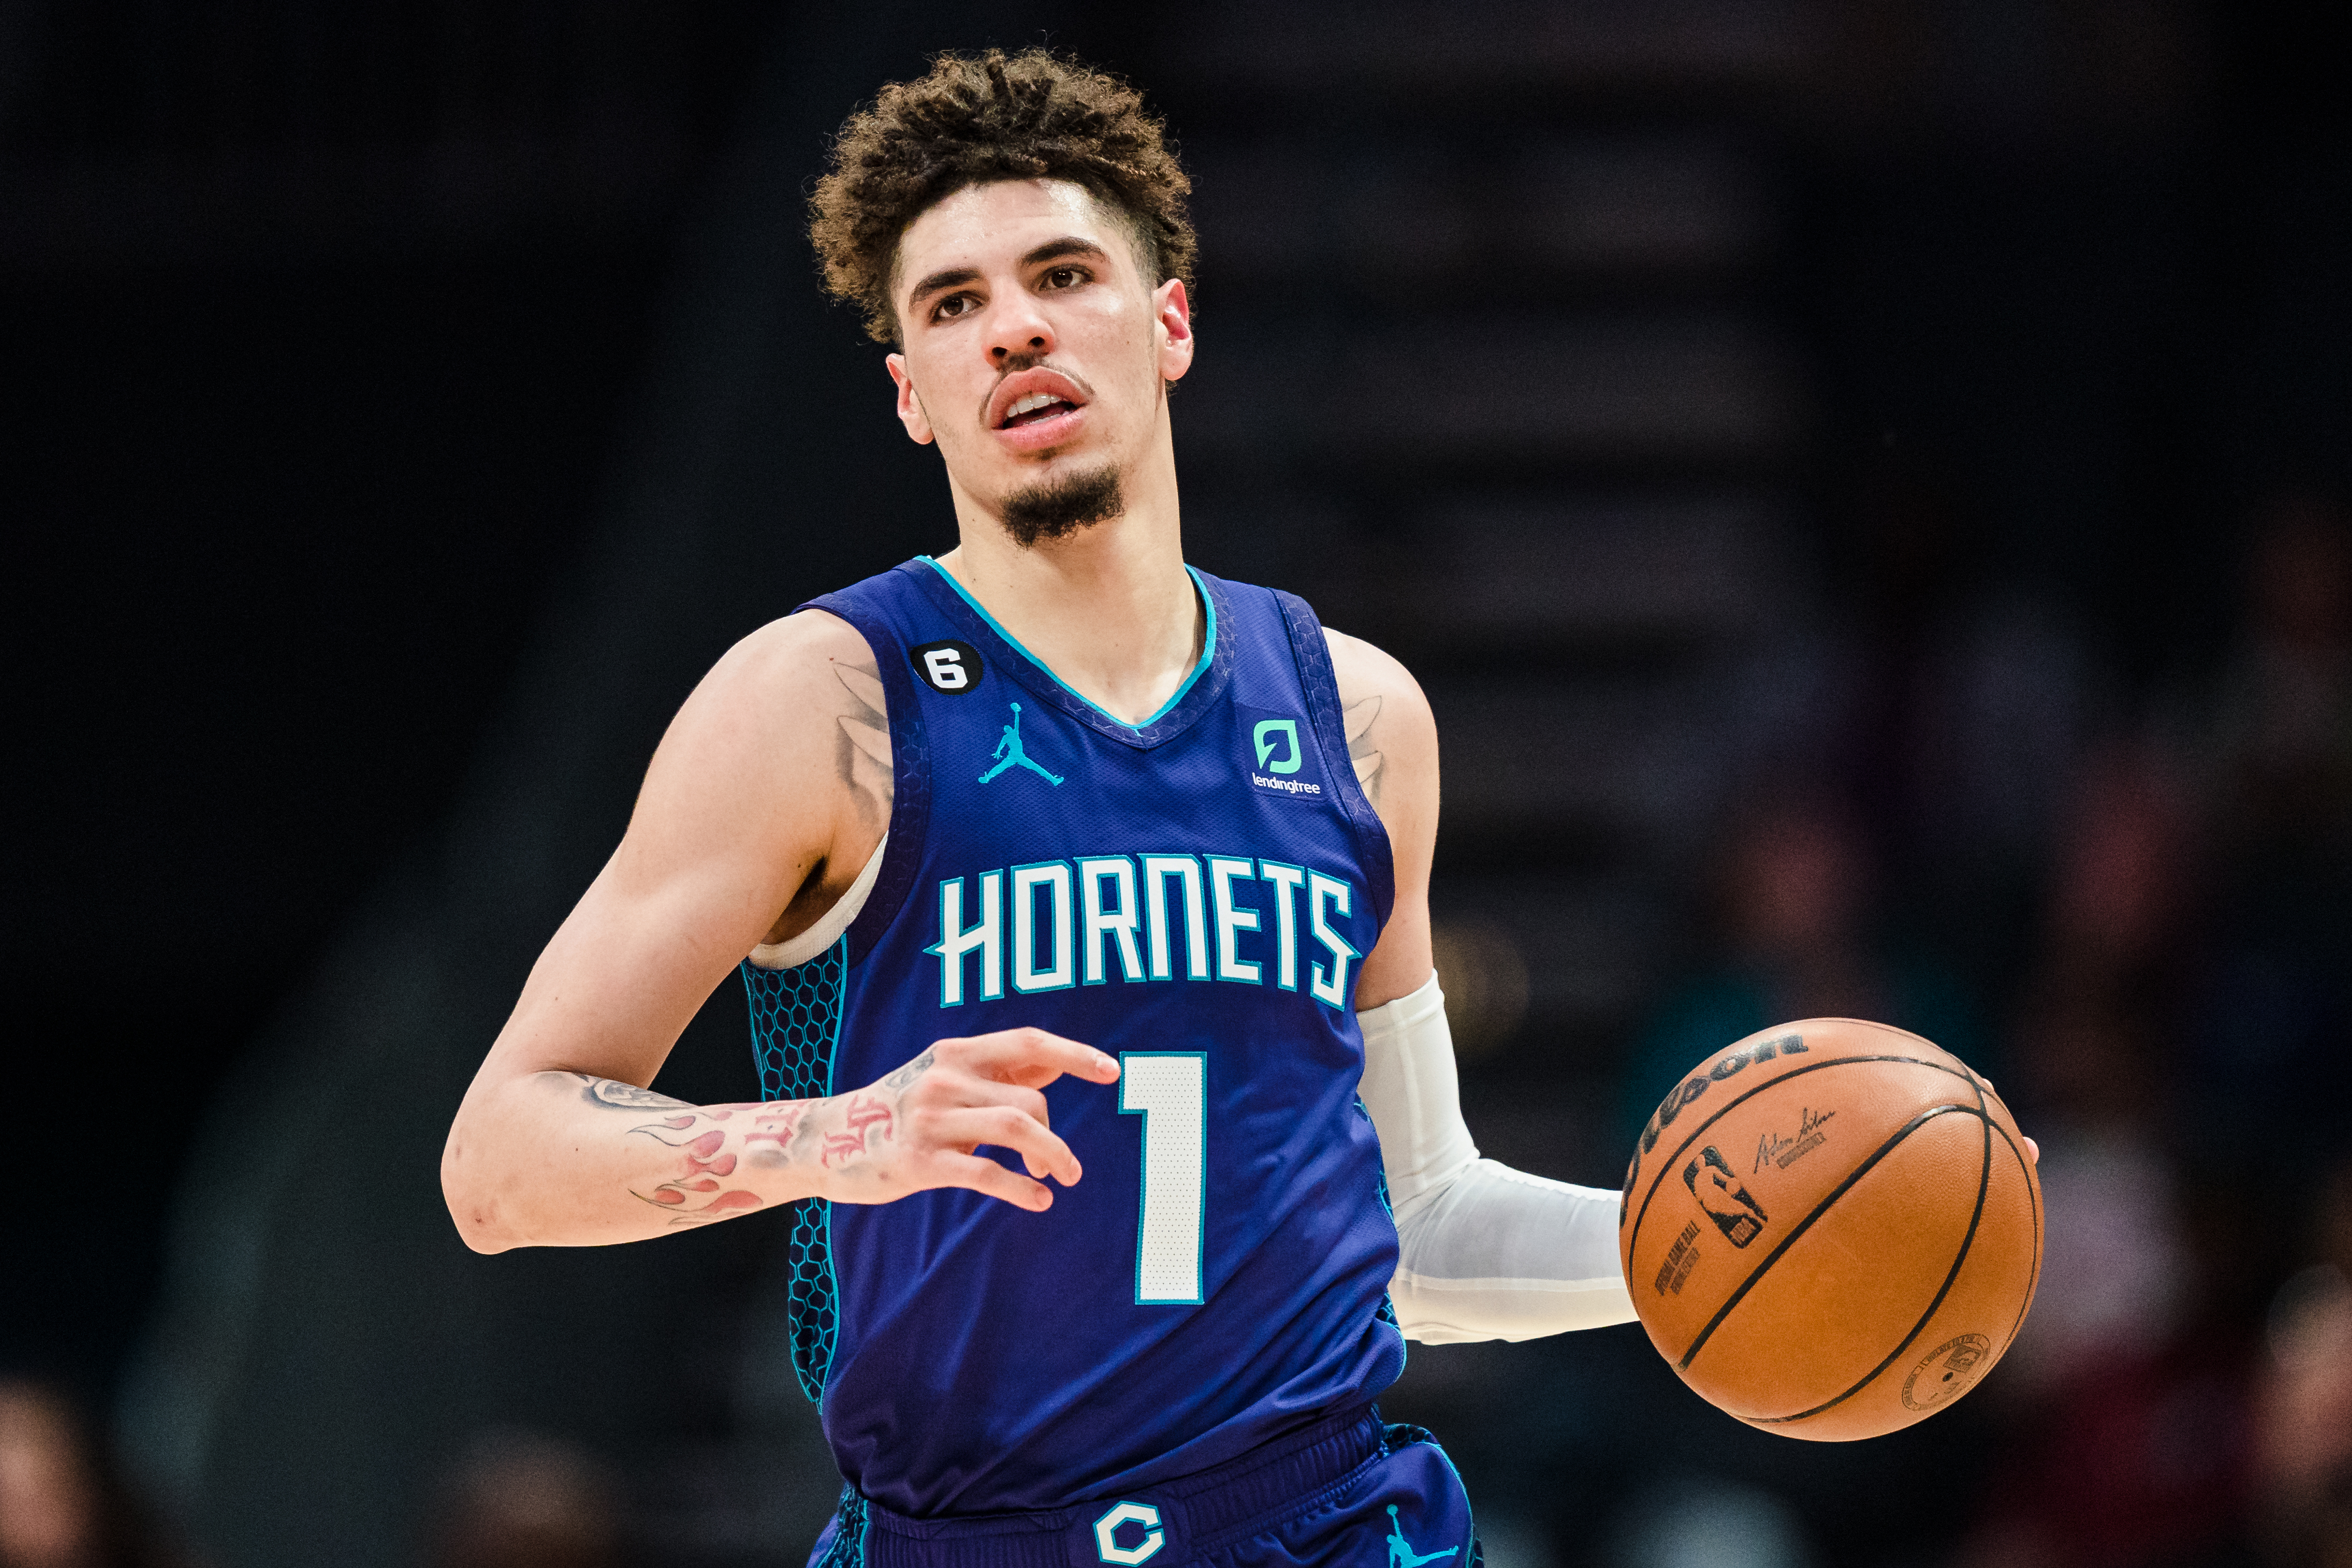 Hornets rookie LaMelo Ball continues to put on a show with his